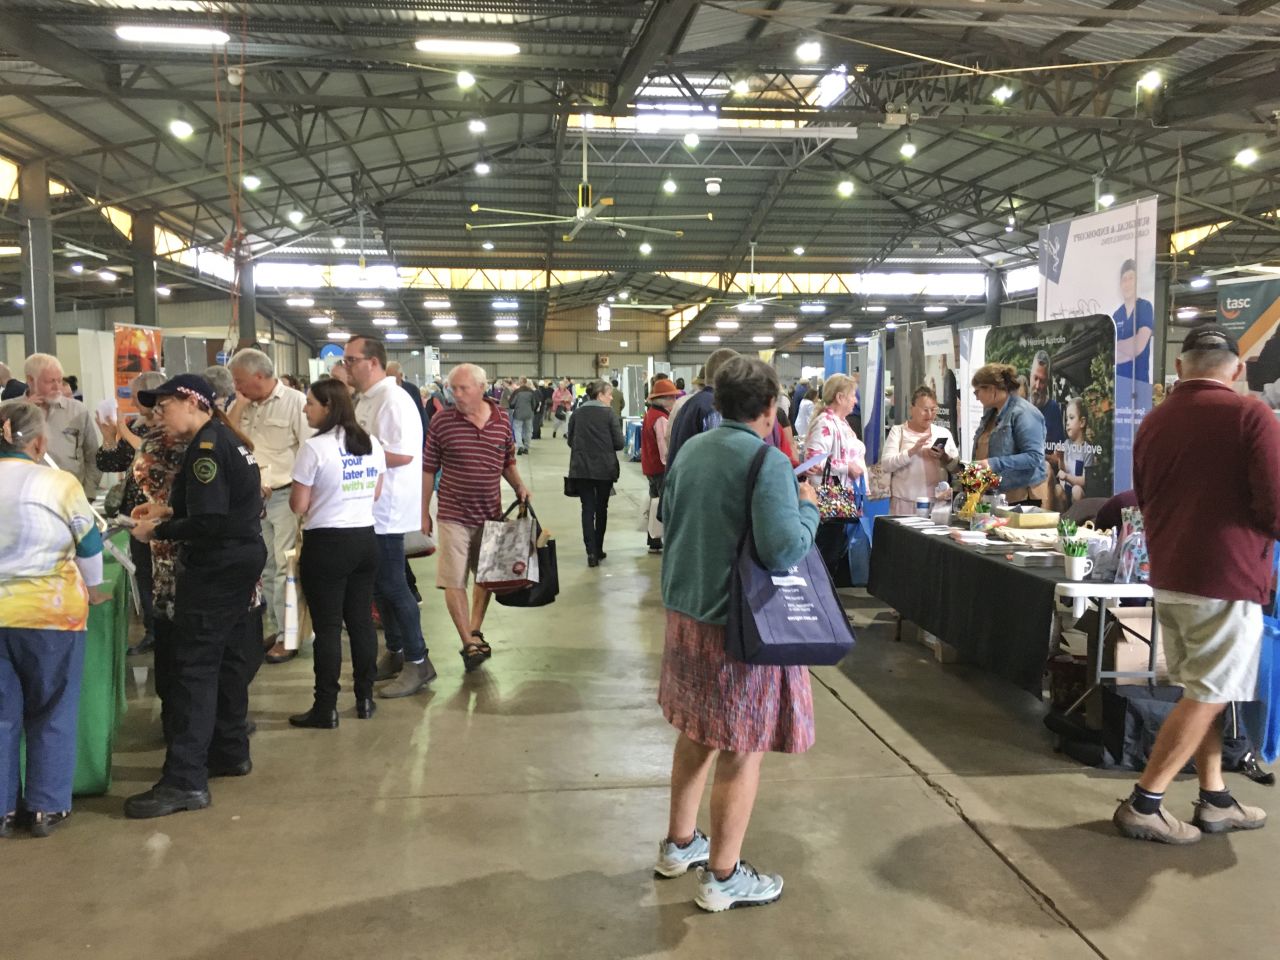 The Seniors EXPO at Toowoomba Show pavilion on 20 October 2022 attracted  105 exhibits and almost 1500 visitors despite inclement weather.